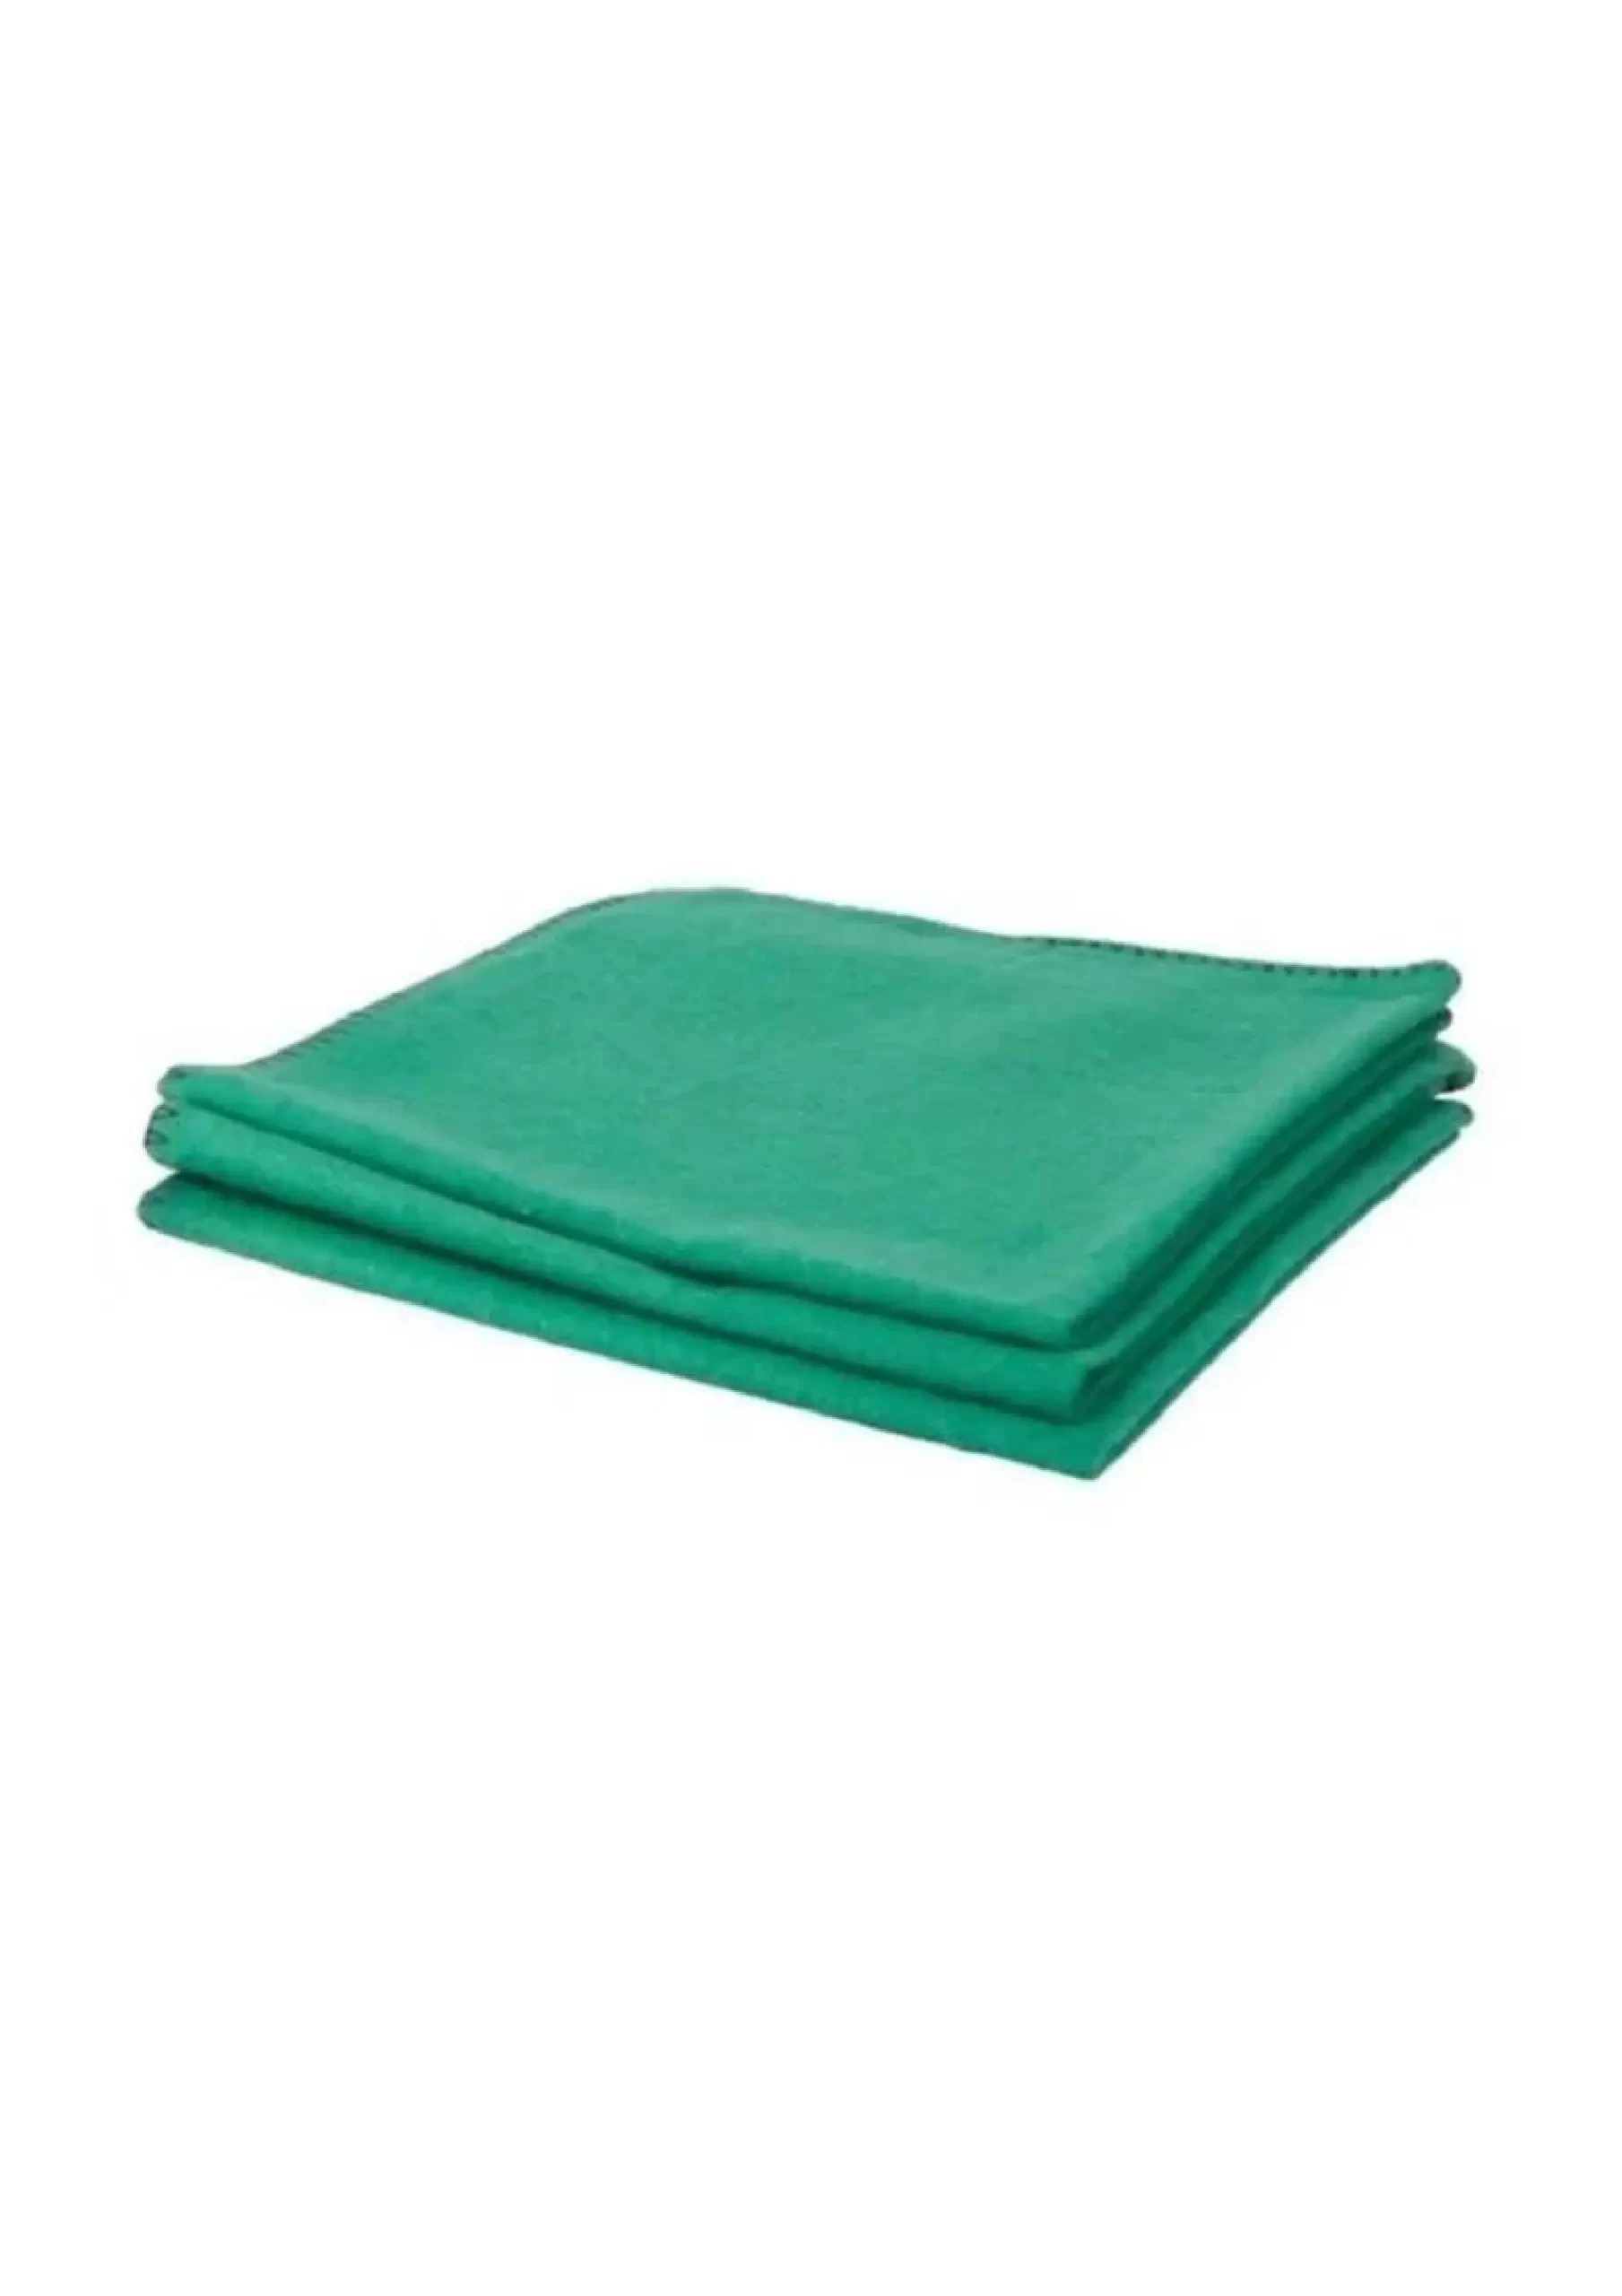 Indian Green Cloth Surgical Green Cloth